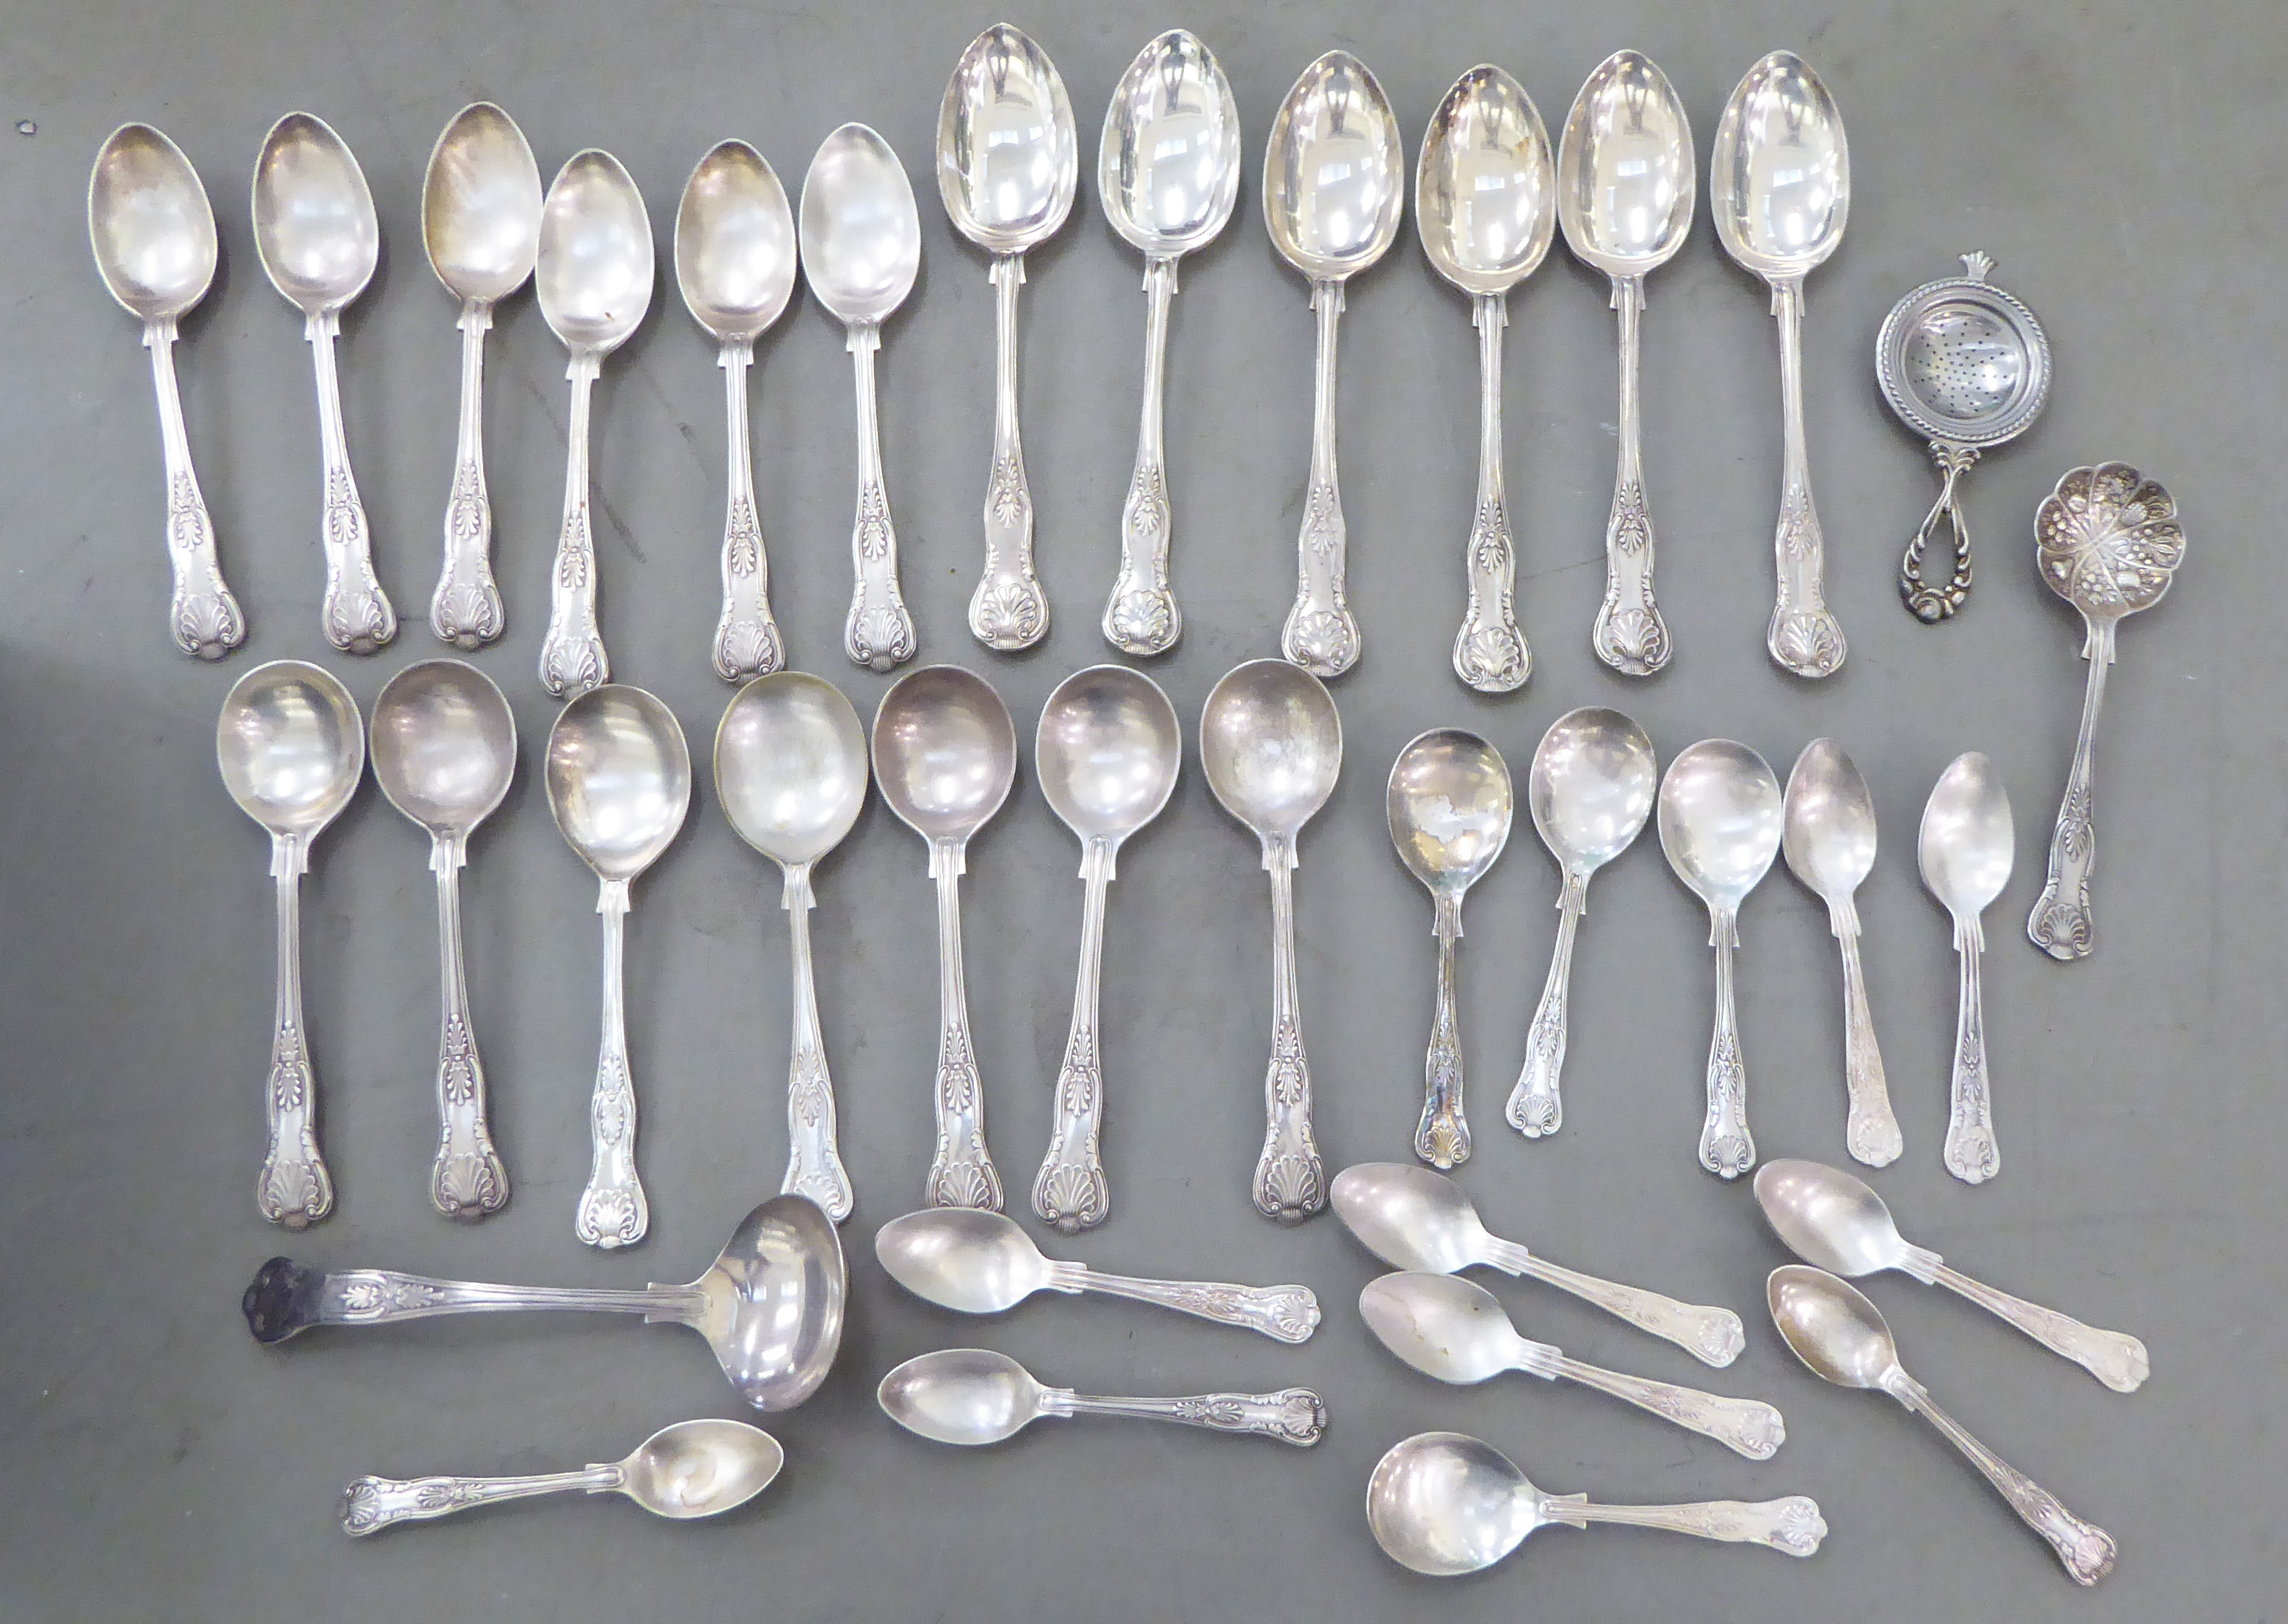 Silver plated Kings pattern cutlery and flatware - Image 4 of 4